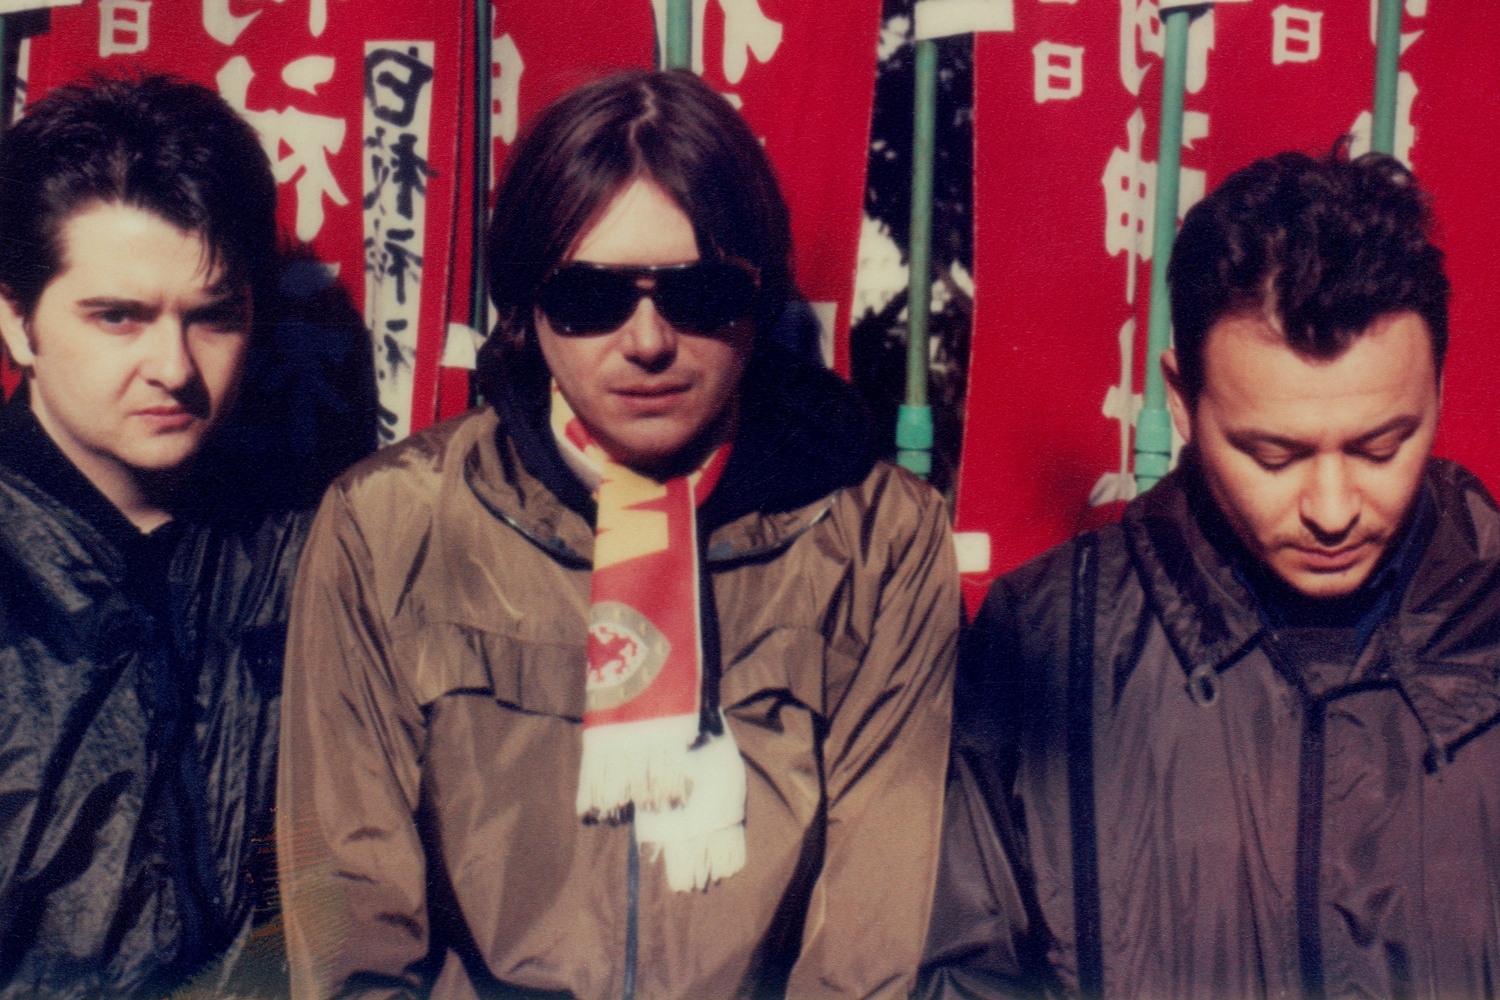 Manic Street Preachers announce 20th anniversary reissue and tour for ‘This Is My Truth Tell Me Yours’